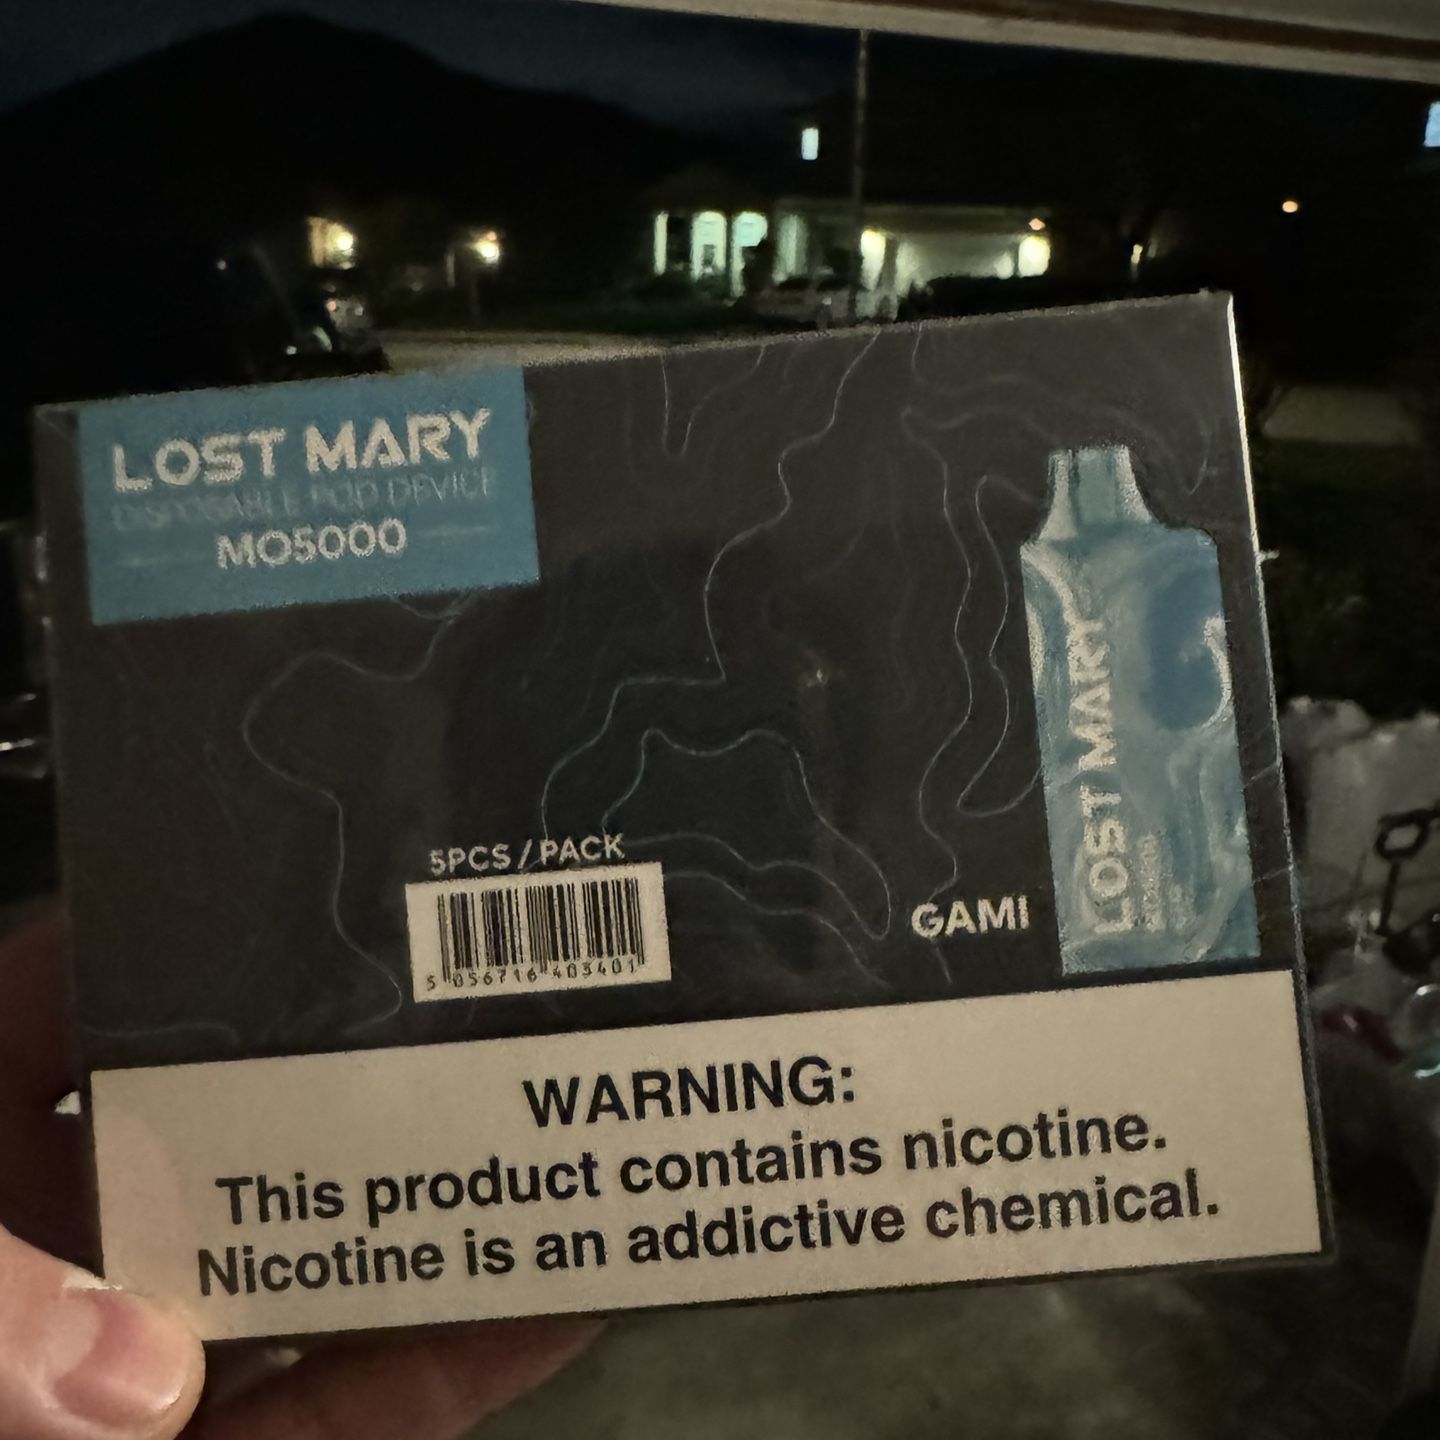 LOST MARY MO5000 DISPOSABLE  GAMI